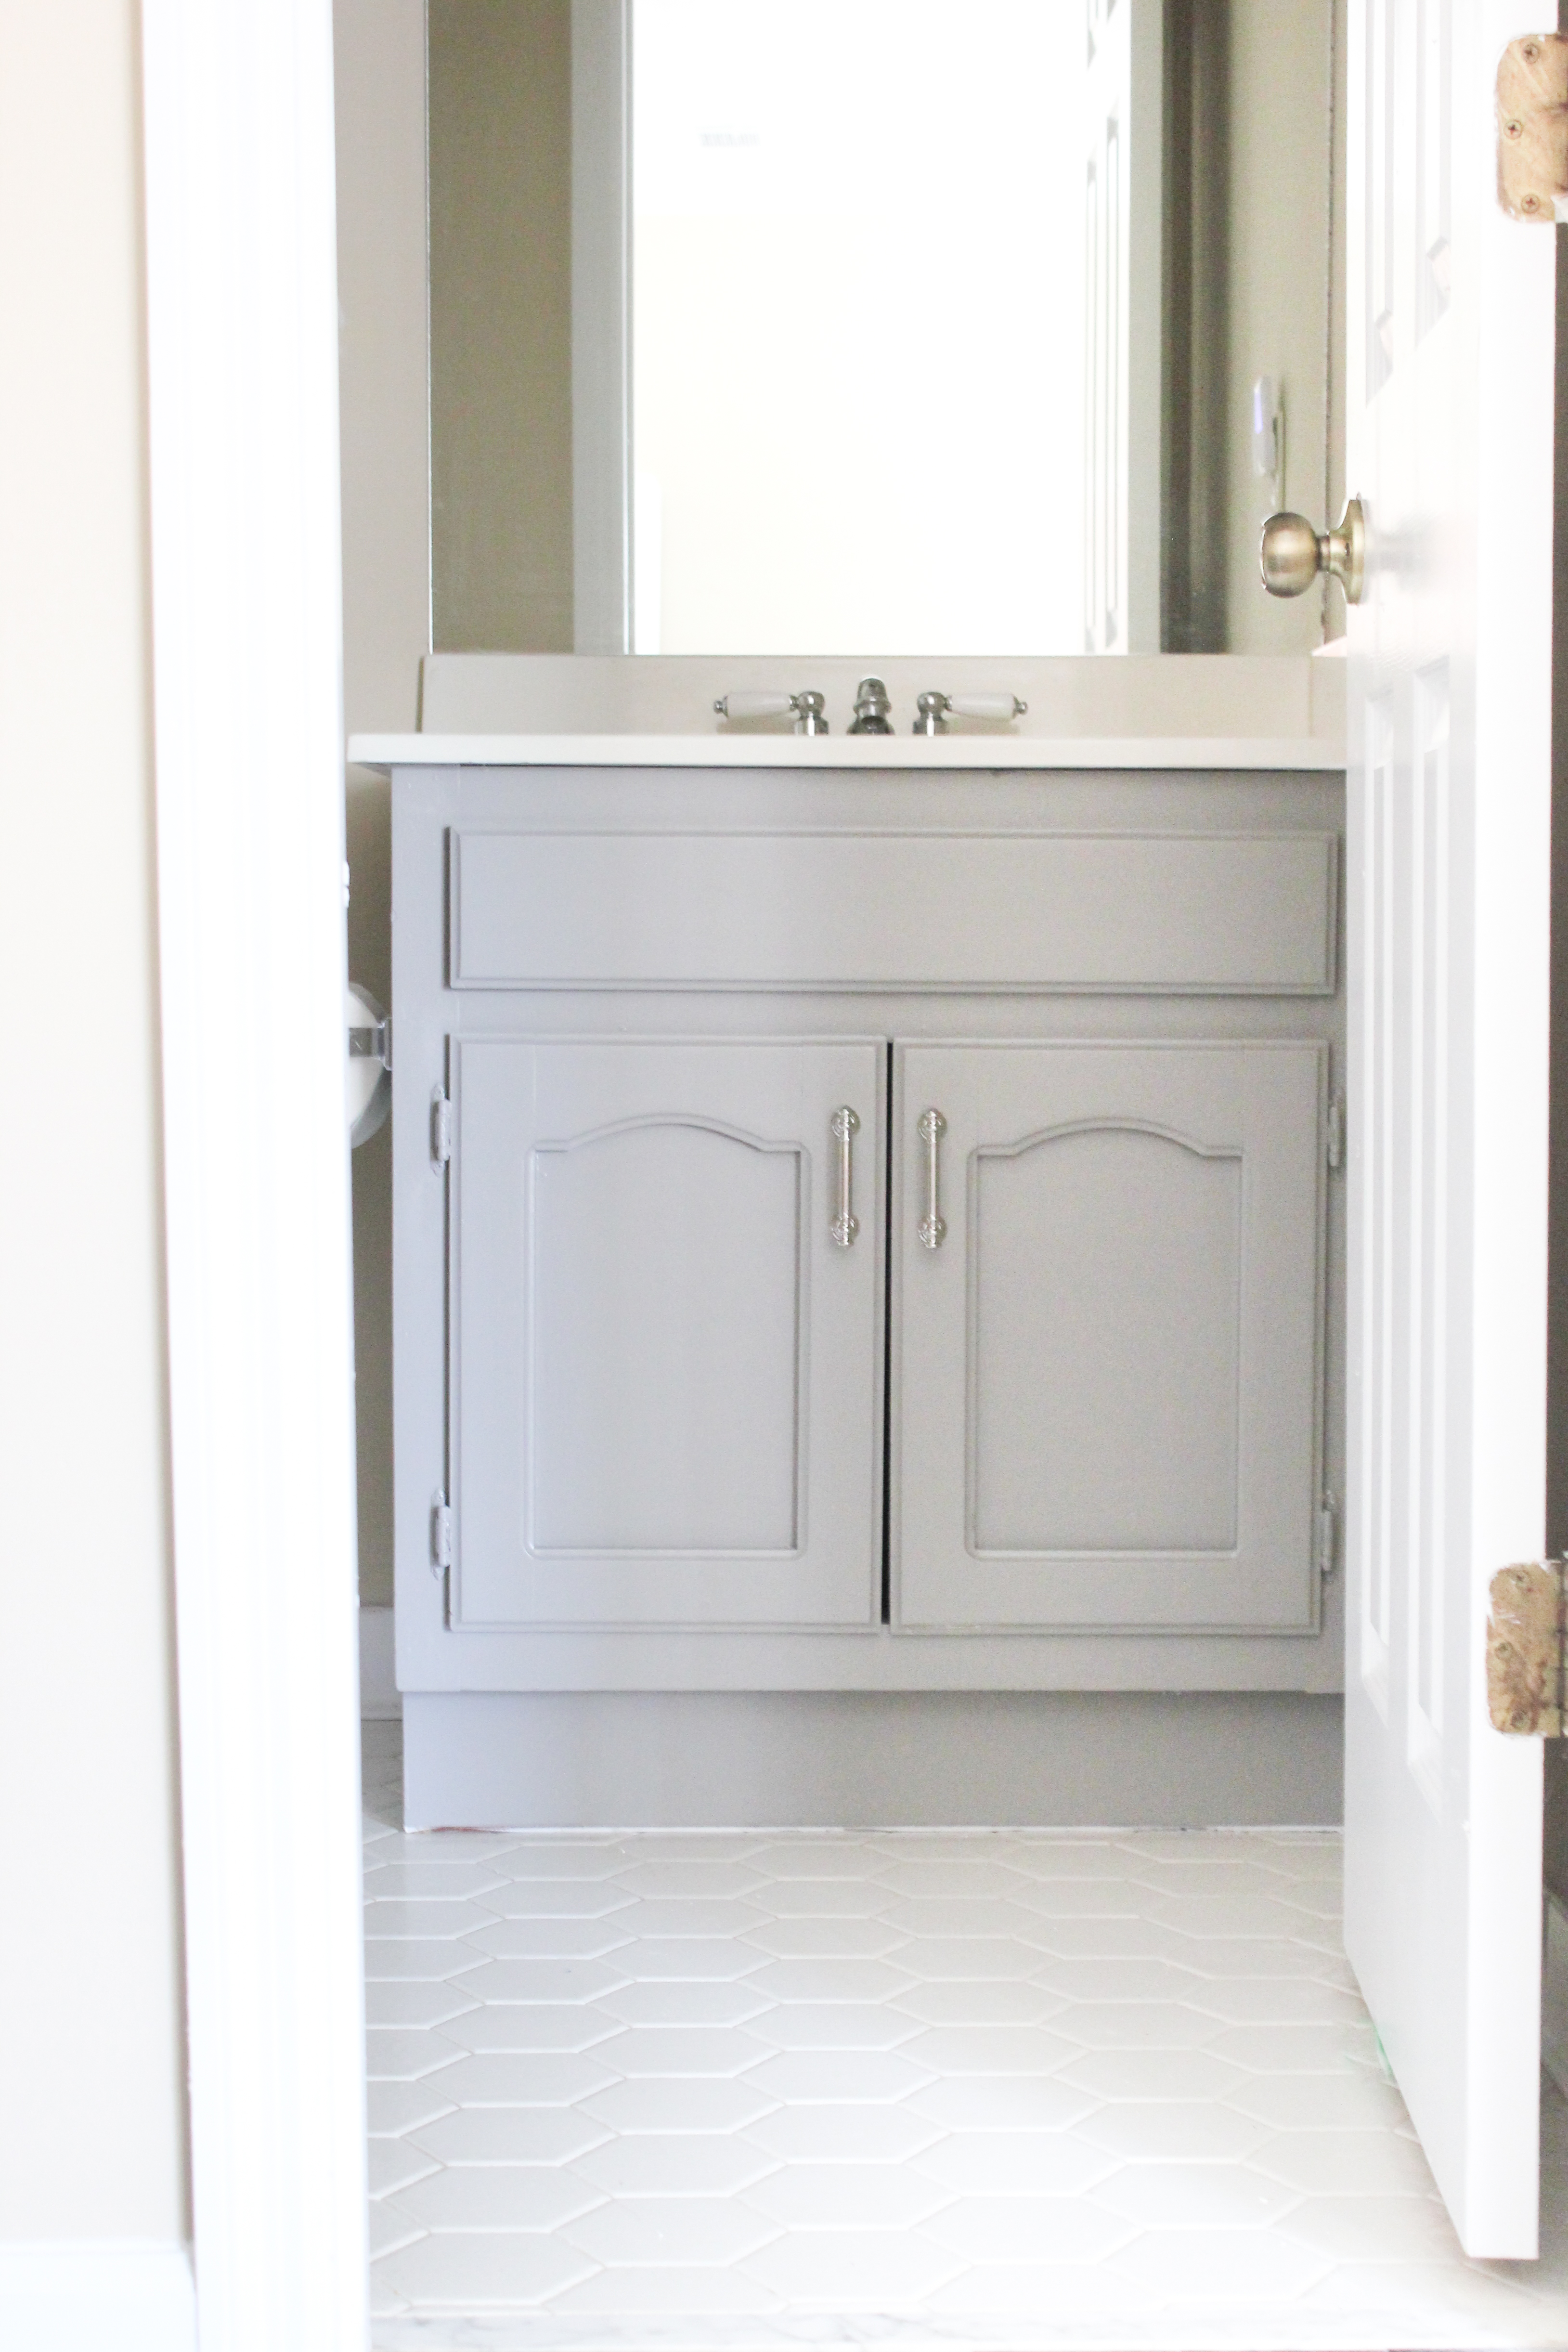 Tips For Painting A Bathroom Vanity, Behr Bathroom Cabinet Paint Colors